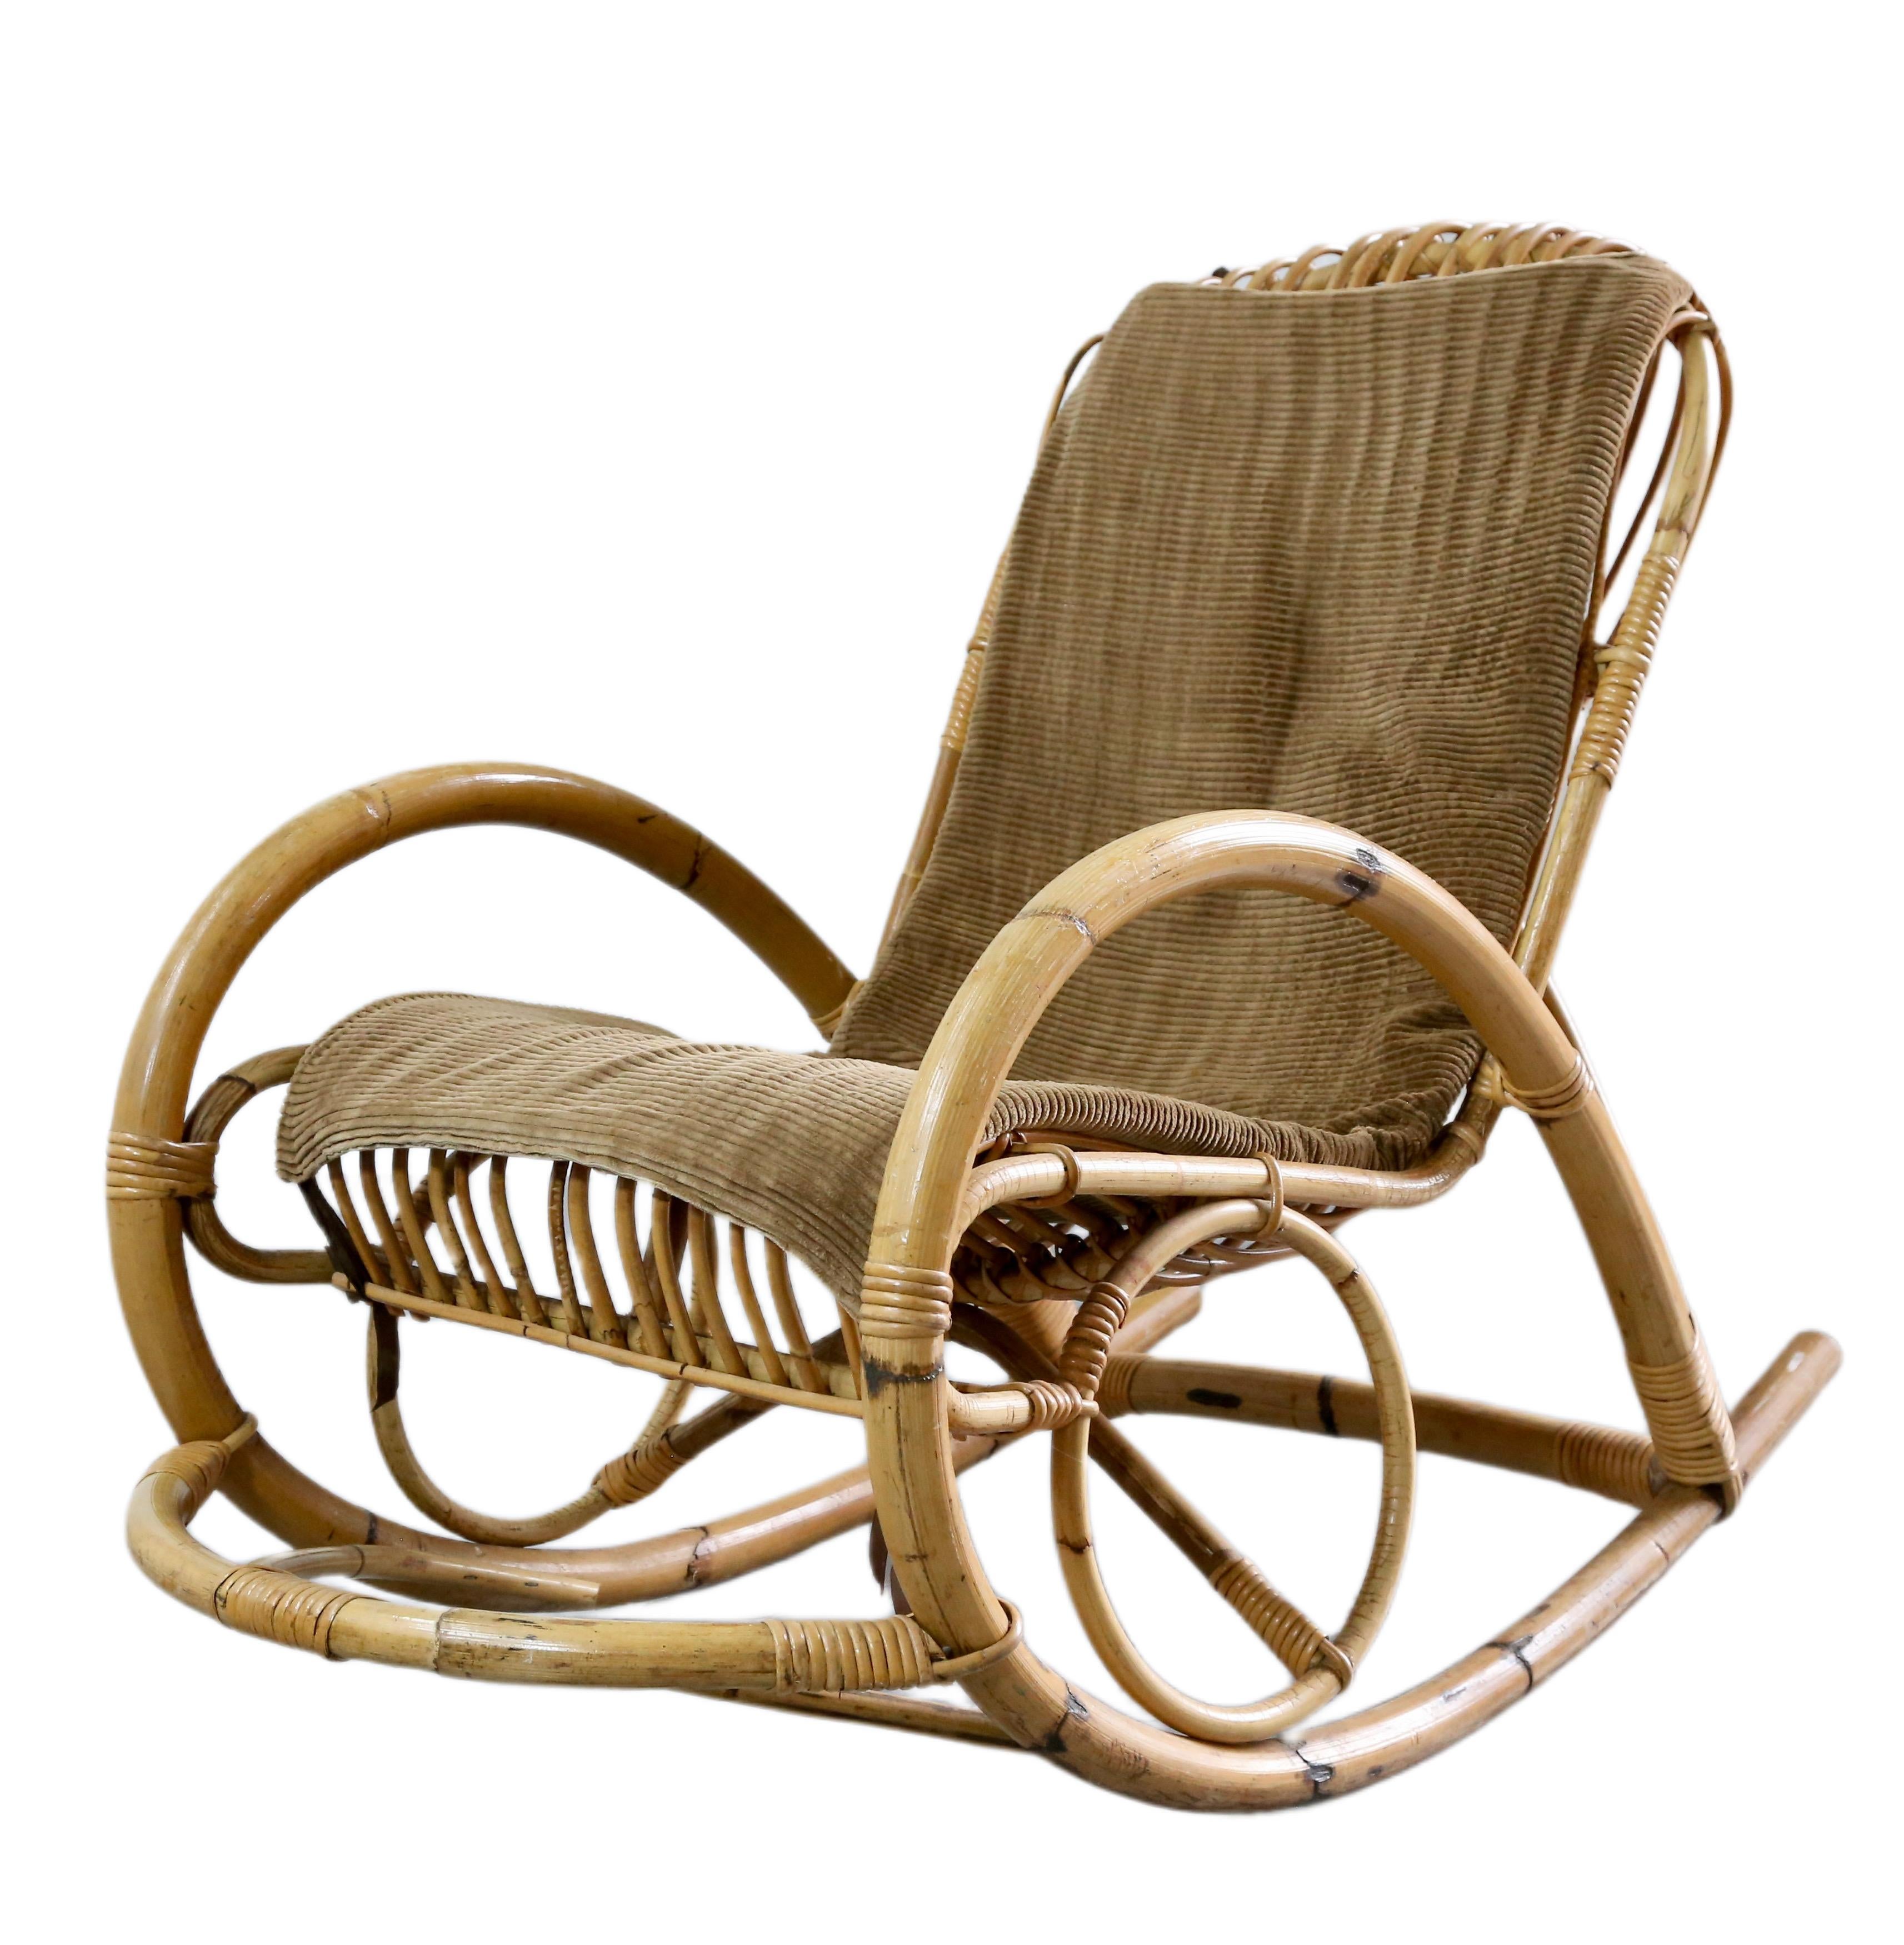 Boho Style Bamboo Wicker Rocking Chair By Dirk Van Sliedregt For Rohe Noordwolde For Sale 2